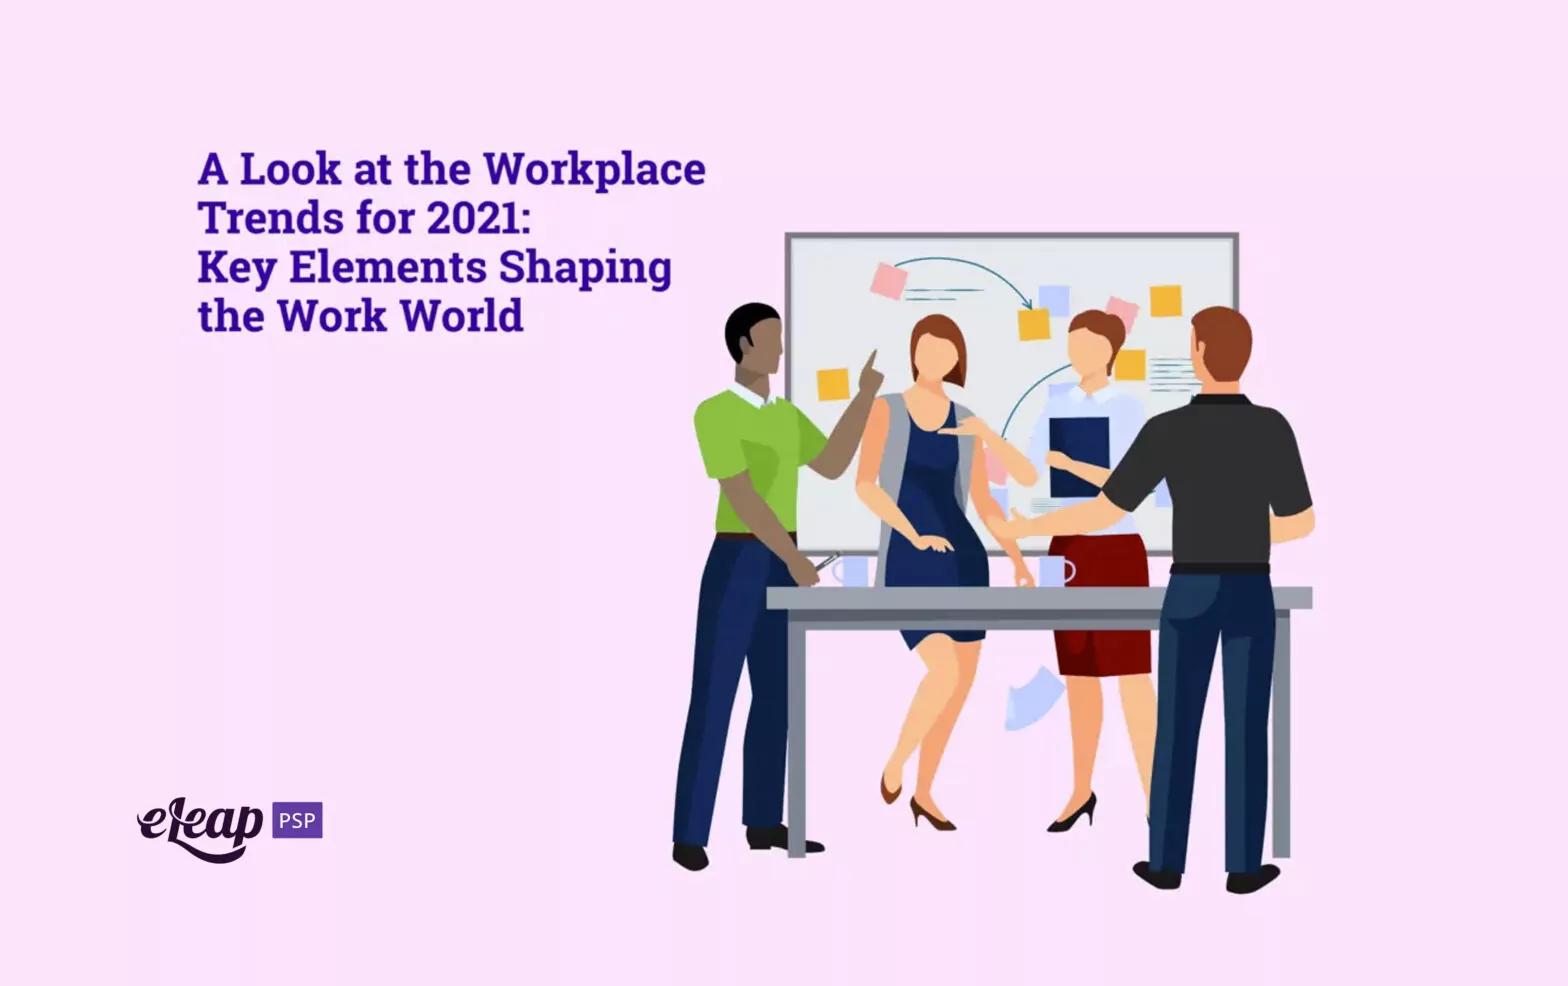 A Look at Workplace Trends for 2021: Key Elements Shaping the Work World